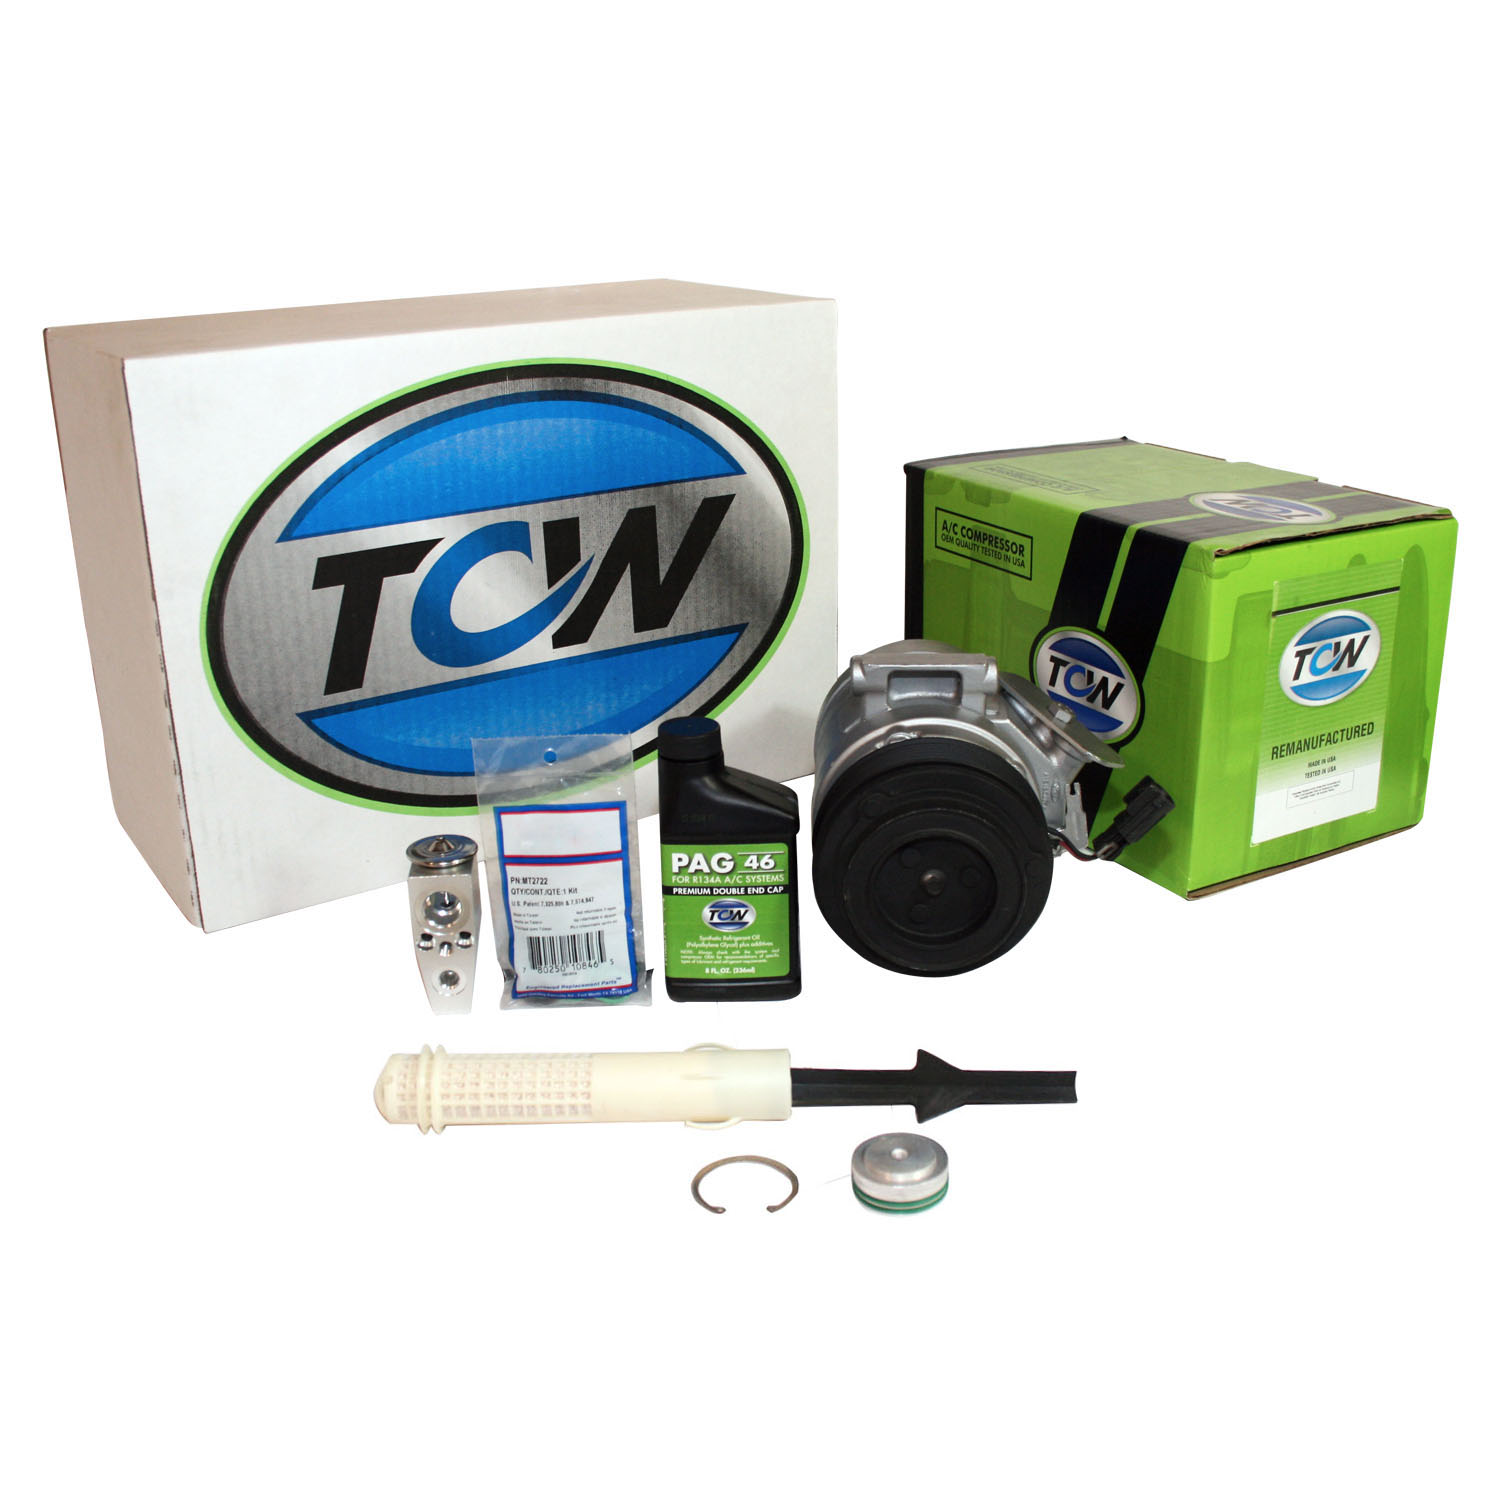 TCW Vehicle A/C Kit K1000405R Remanufactured Product Image field_60b6a13a6e67c